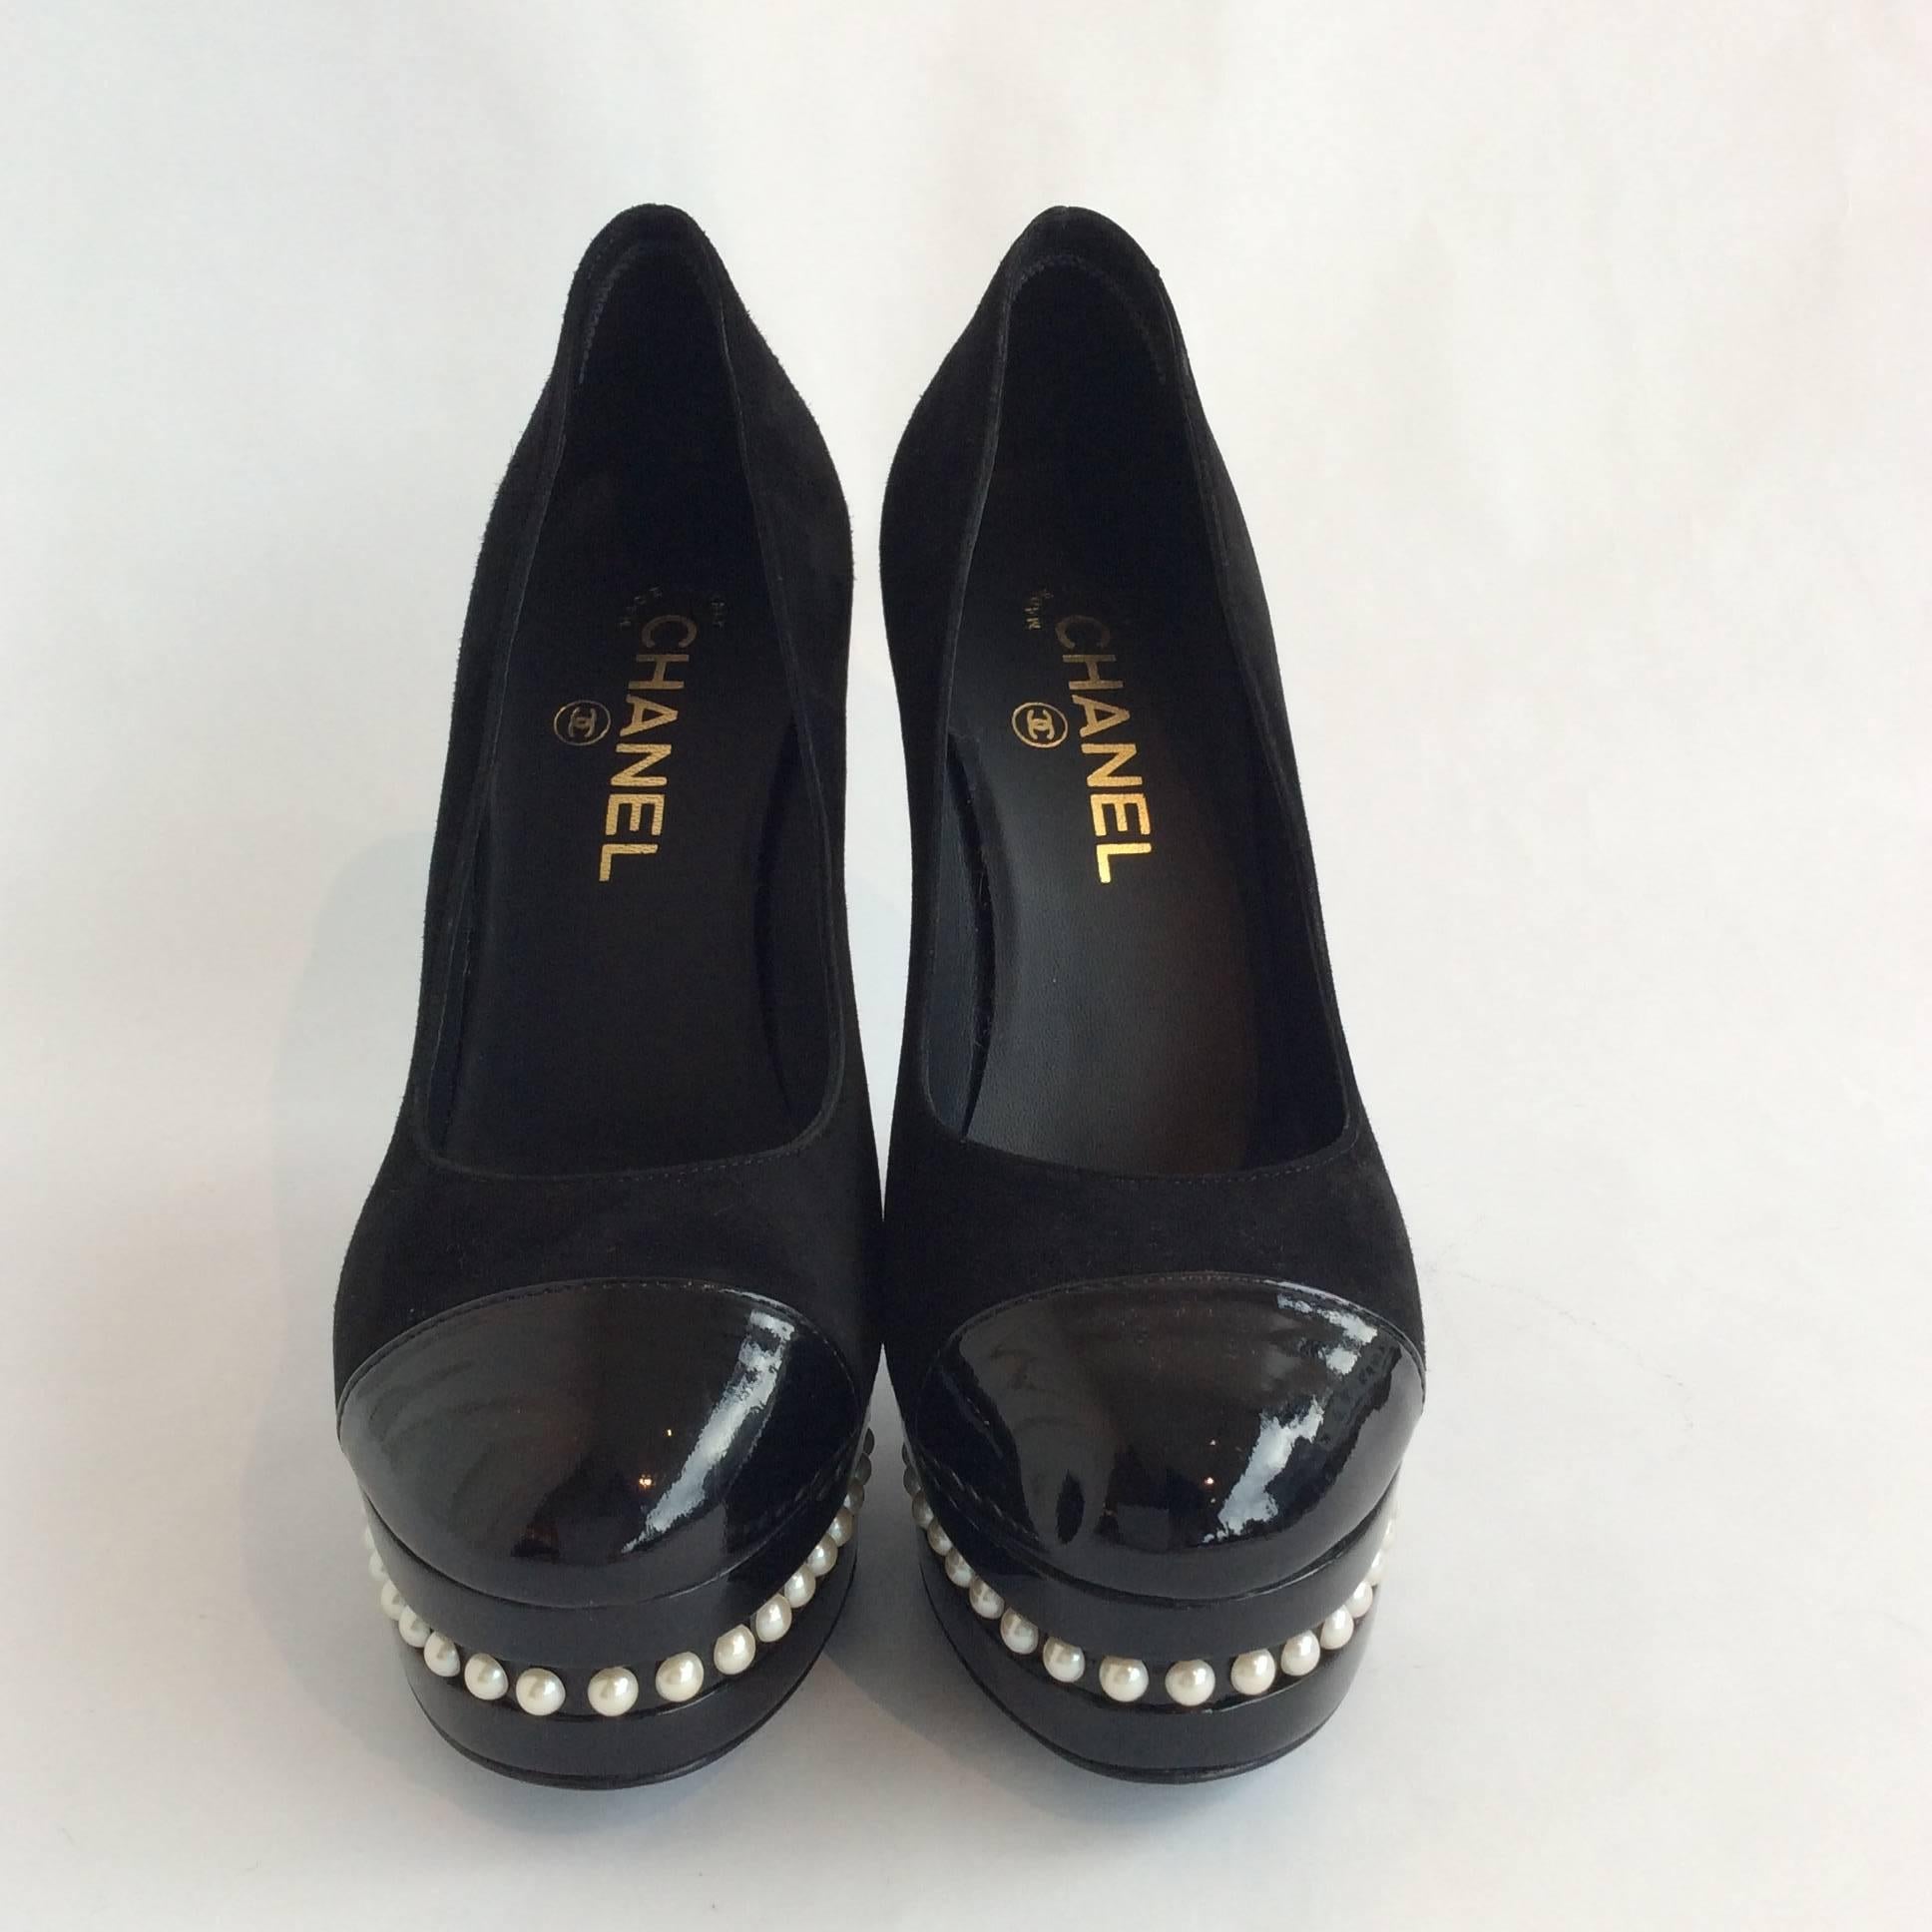 Chanel platform pumps in black suede with black patent tips. The black acrylic platform is 1.25in high and has a single row of pearls going through the middle. The acrylic heel is 5in high and has two rows of pearls in the upper half.